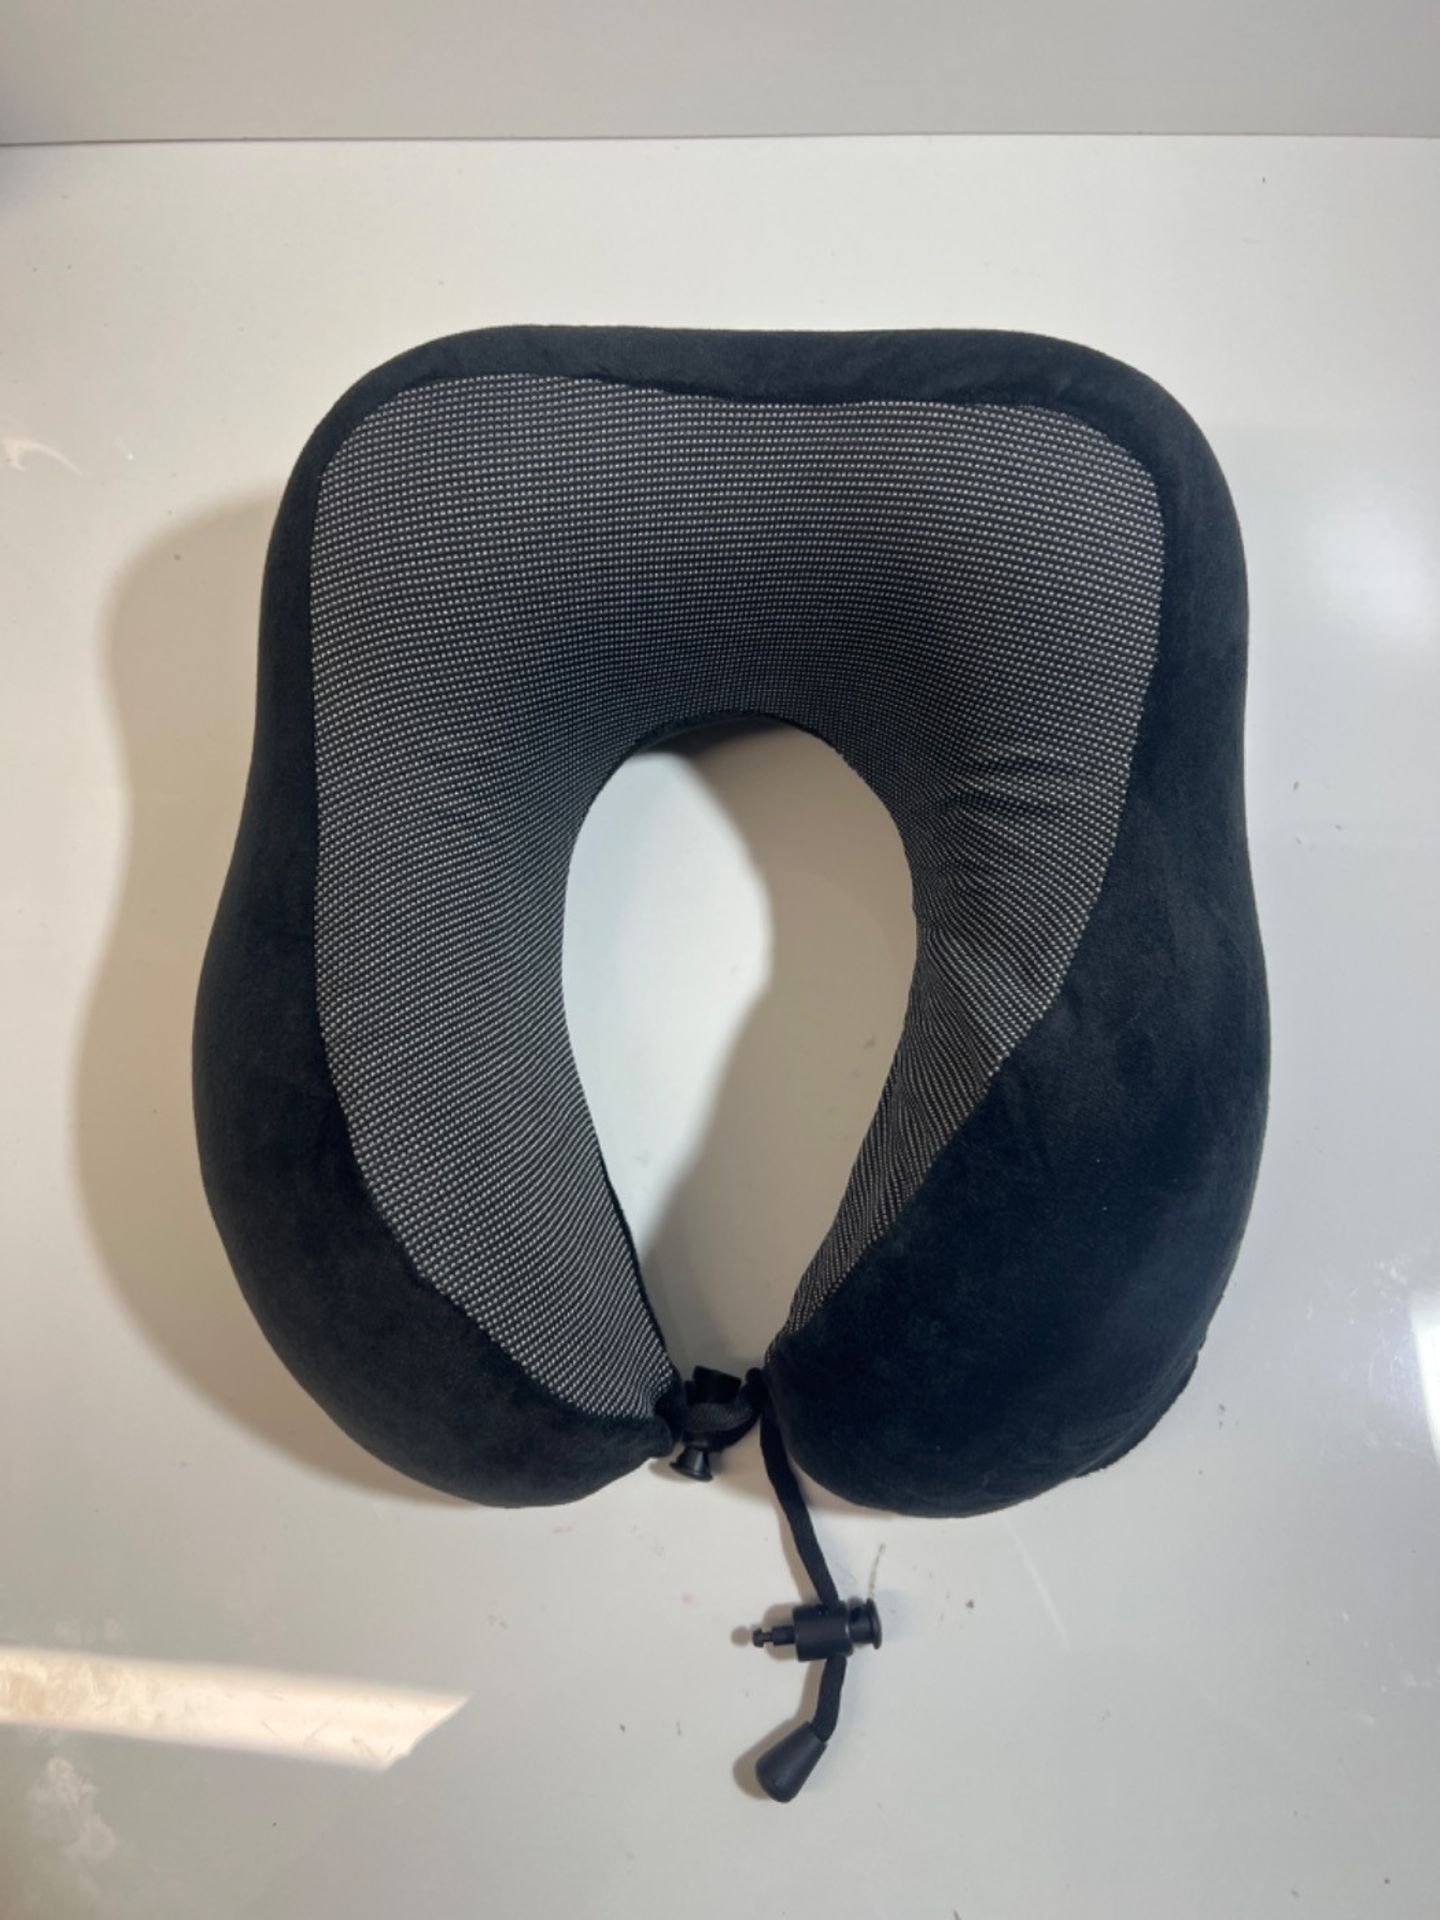 Travel Pillow, Best Memory Foam Neck Pillow Head Support Soft Pillow for Sleeping Rest, Airplane Ca - Image 3 of 3